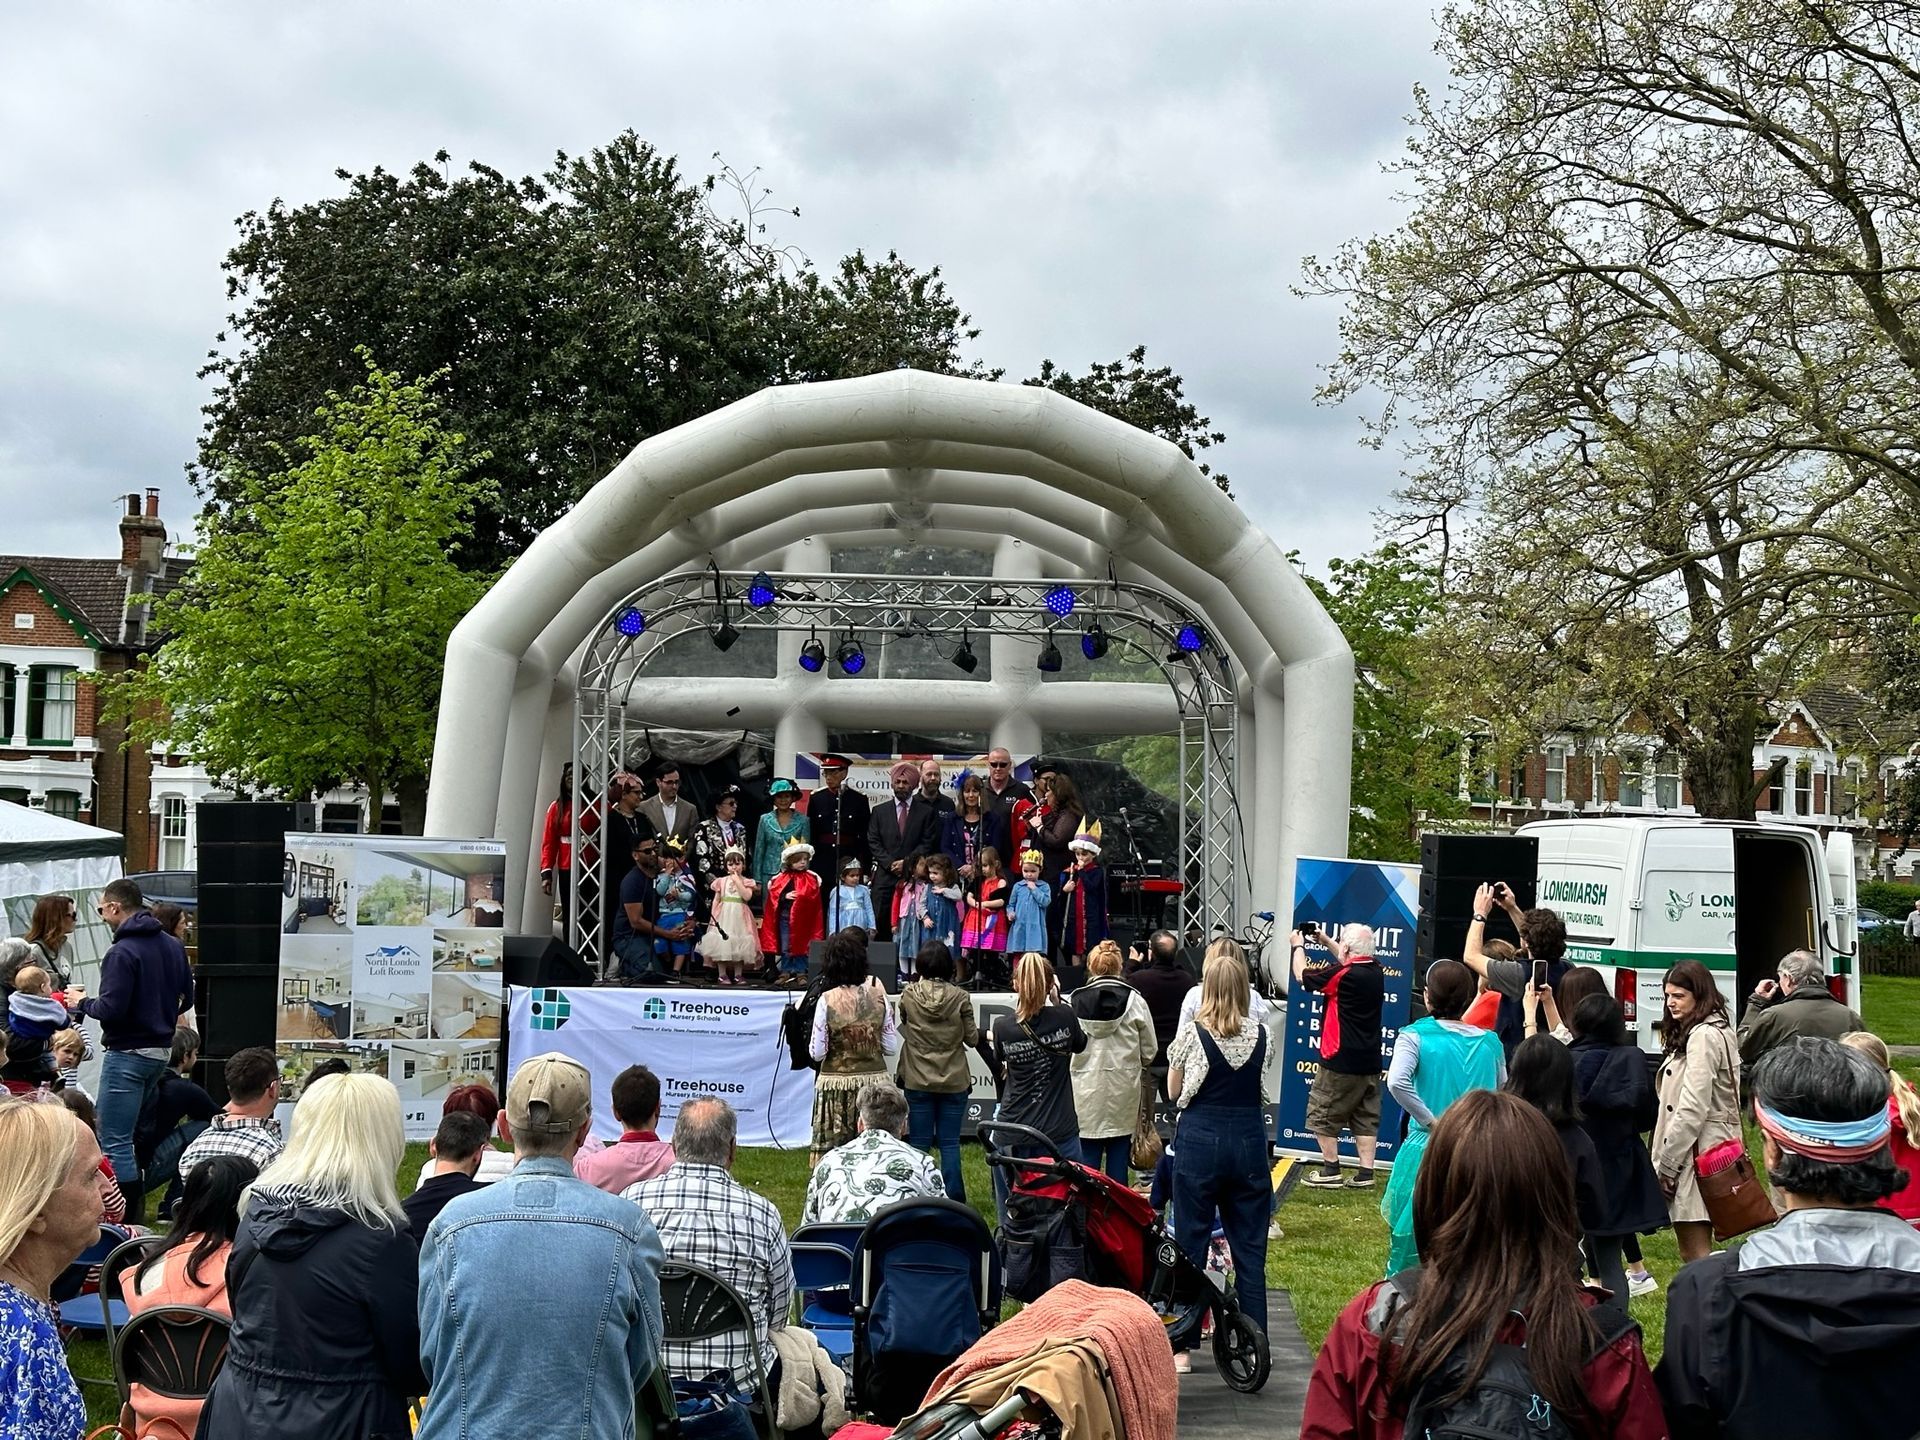 Inflatable roof trailer stage with a children's choir performing on it and a large audience in front.